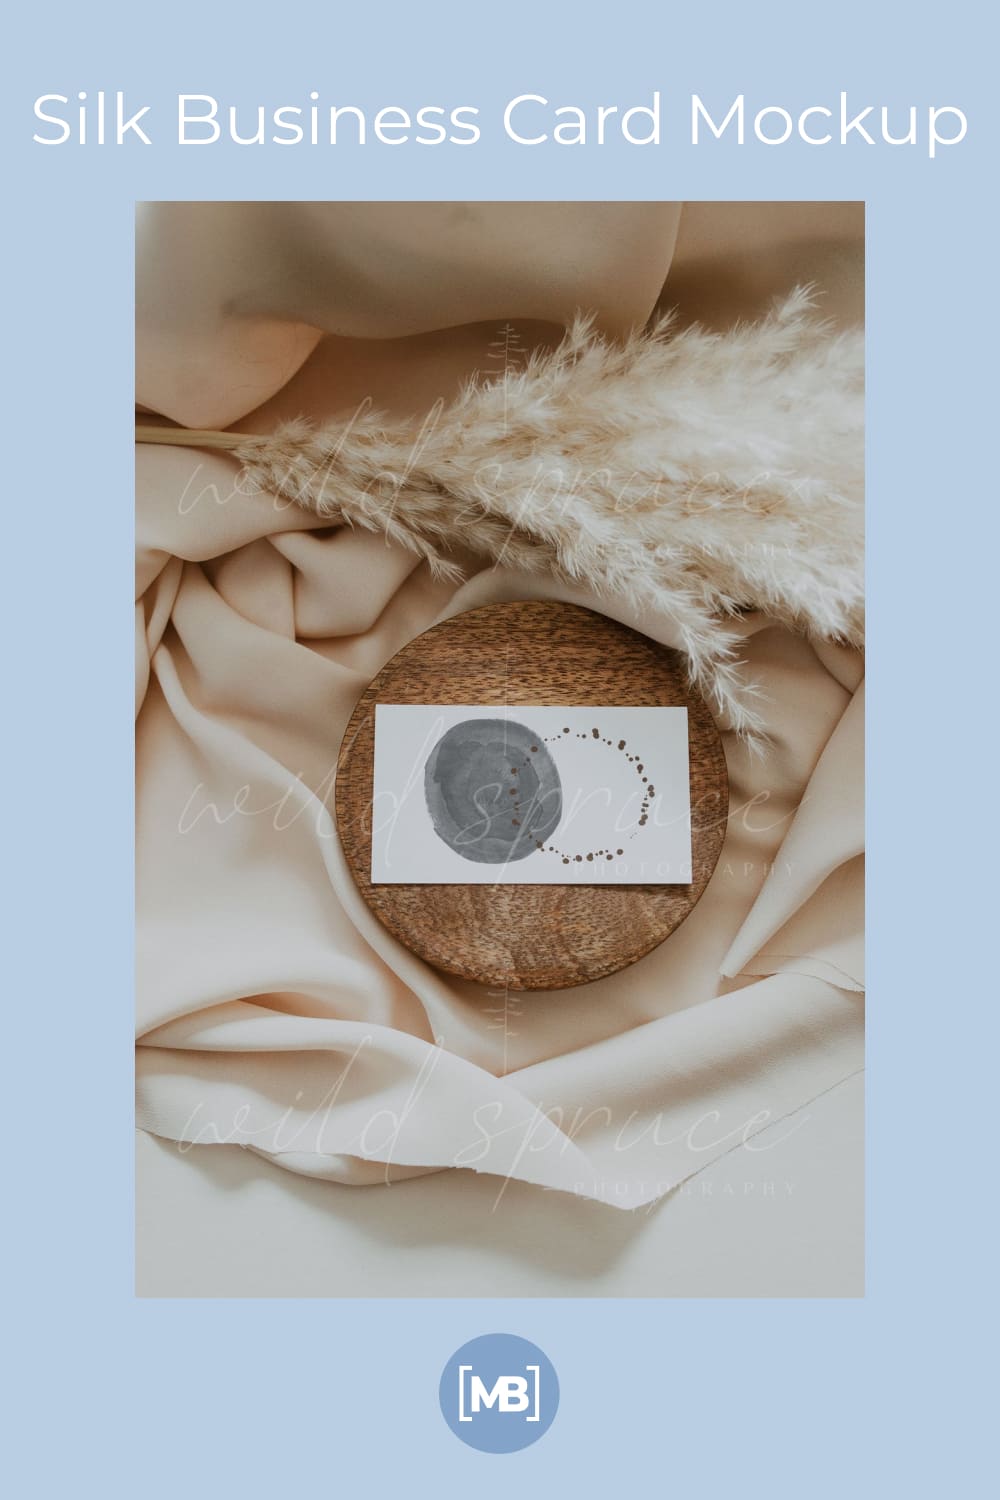 This is a lovely delicate business card with a watercolor circle.